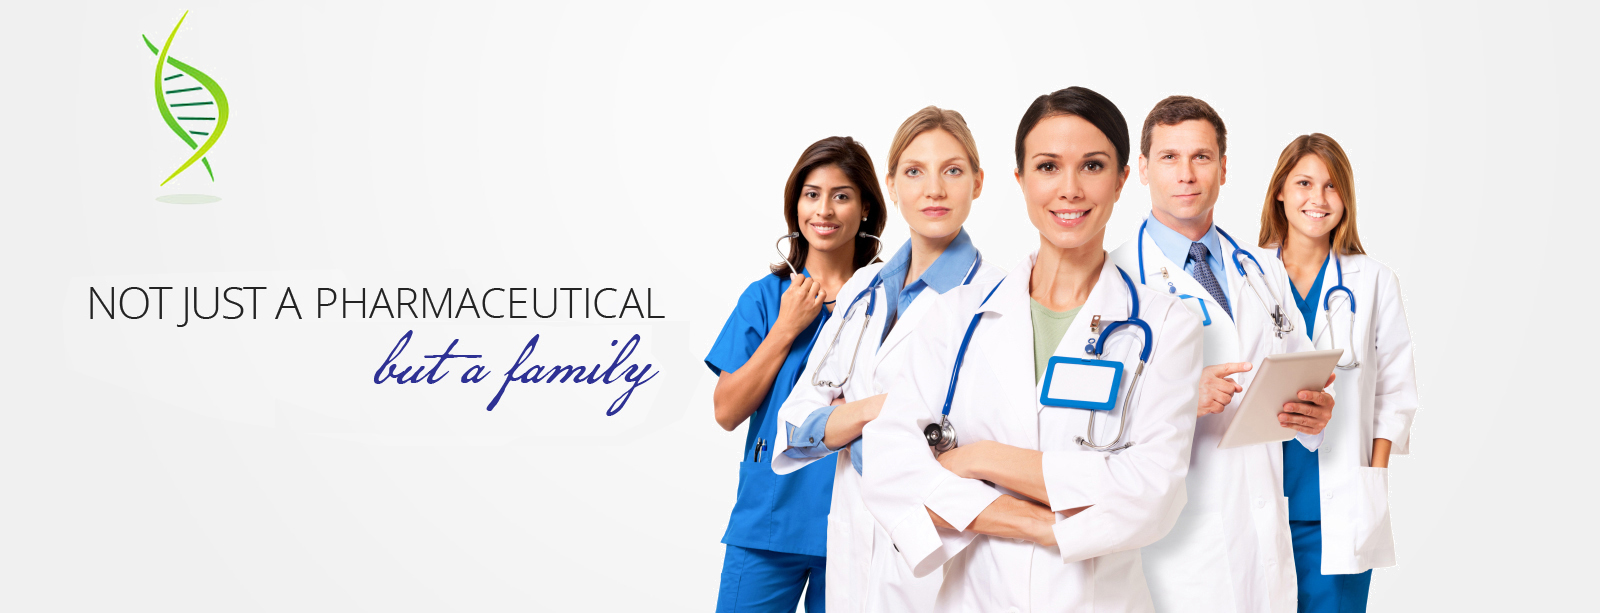 A pharmaceutical your family can trust